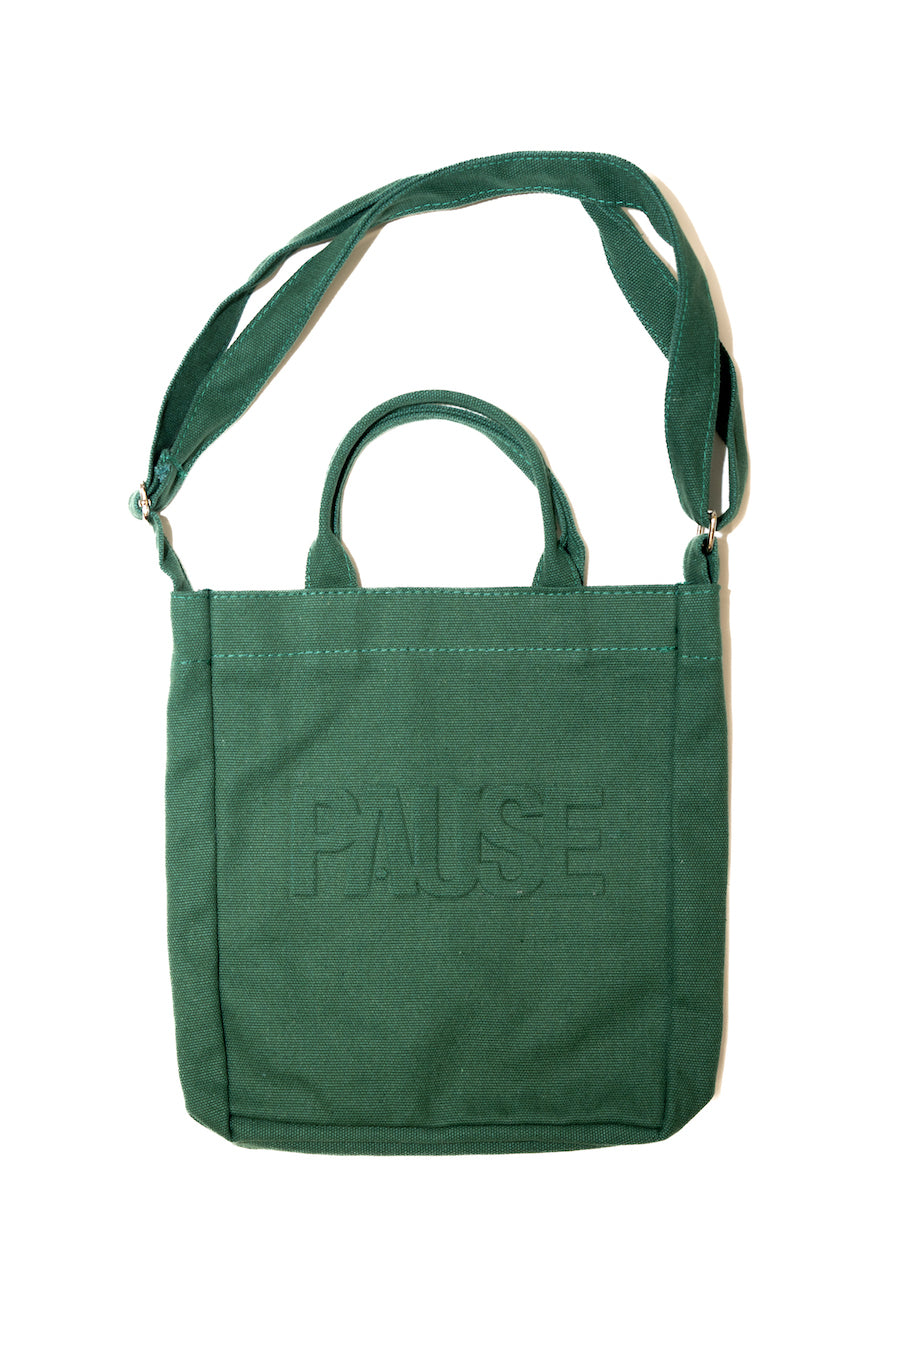 PAUSE 'Forest' Embossed Tote Bag